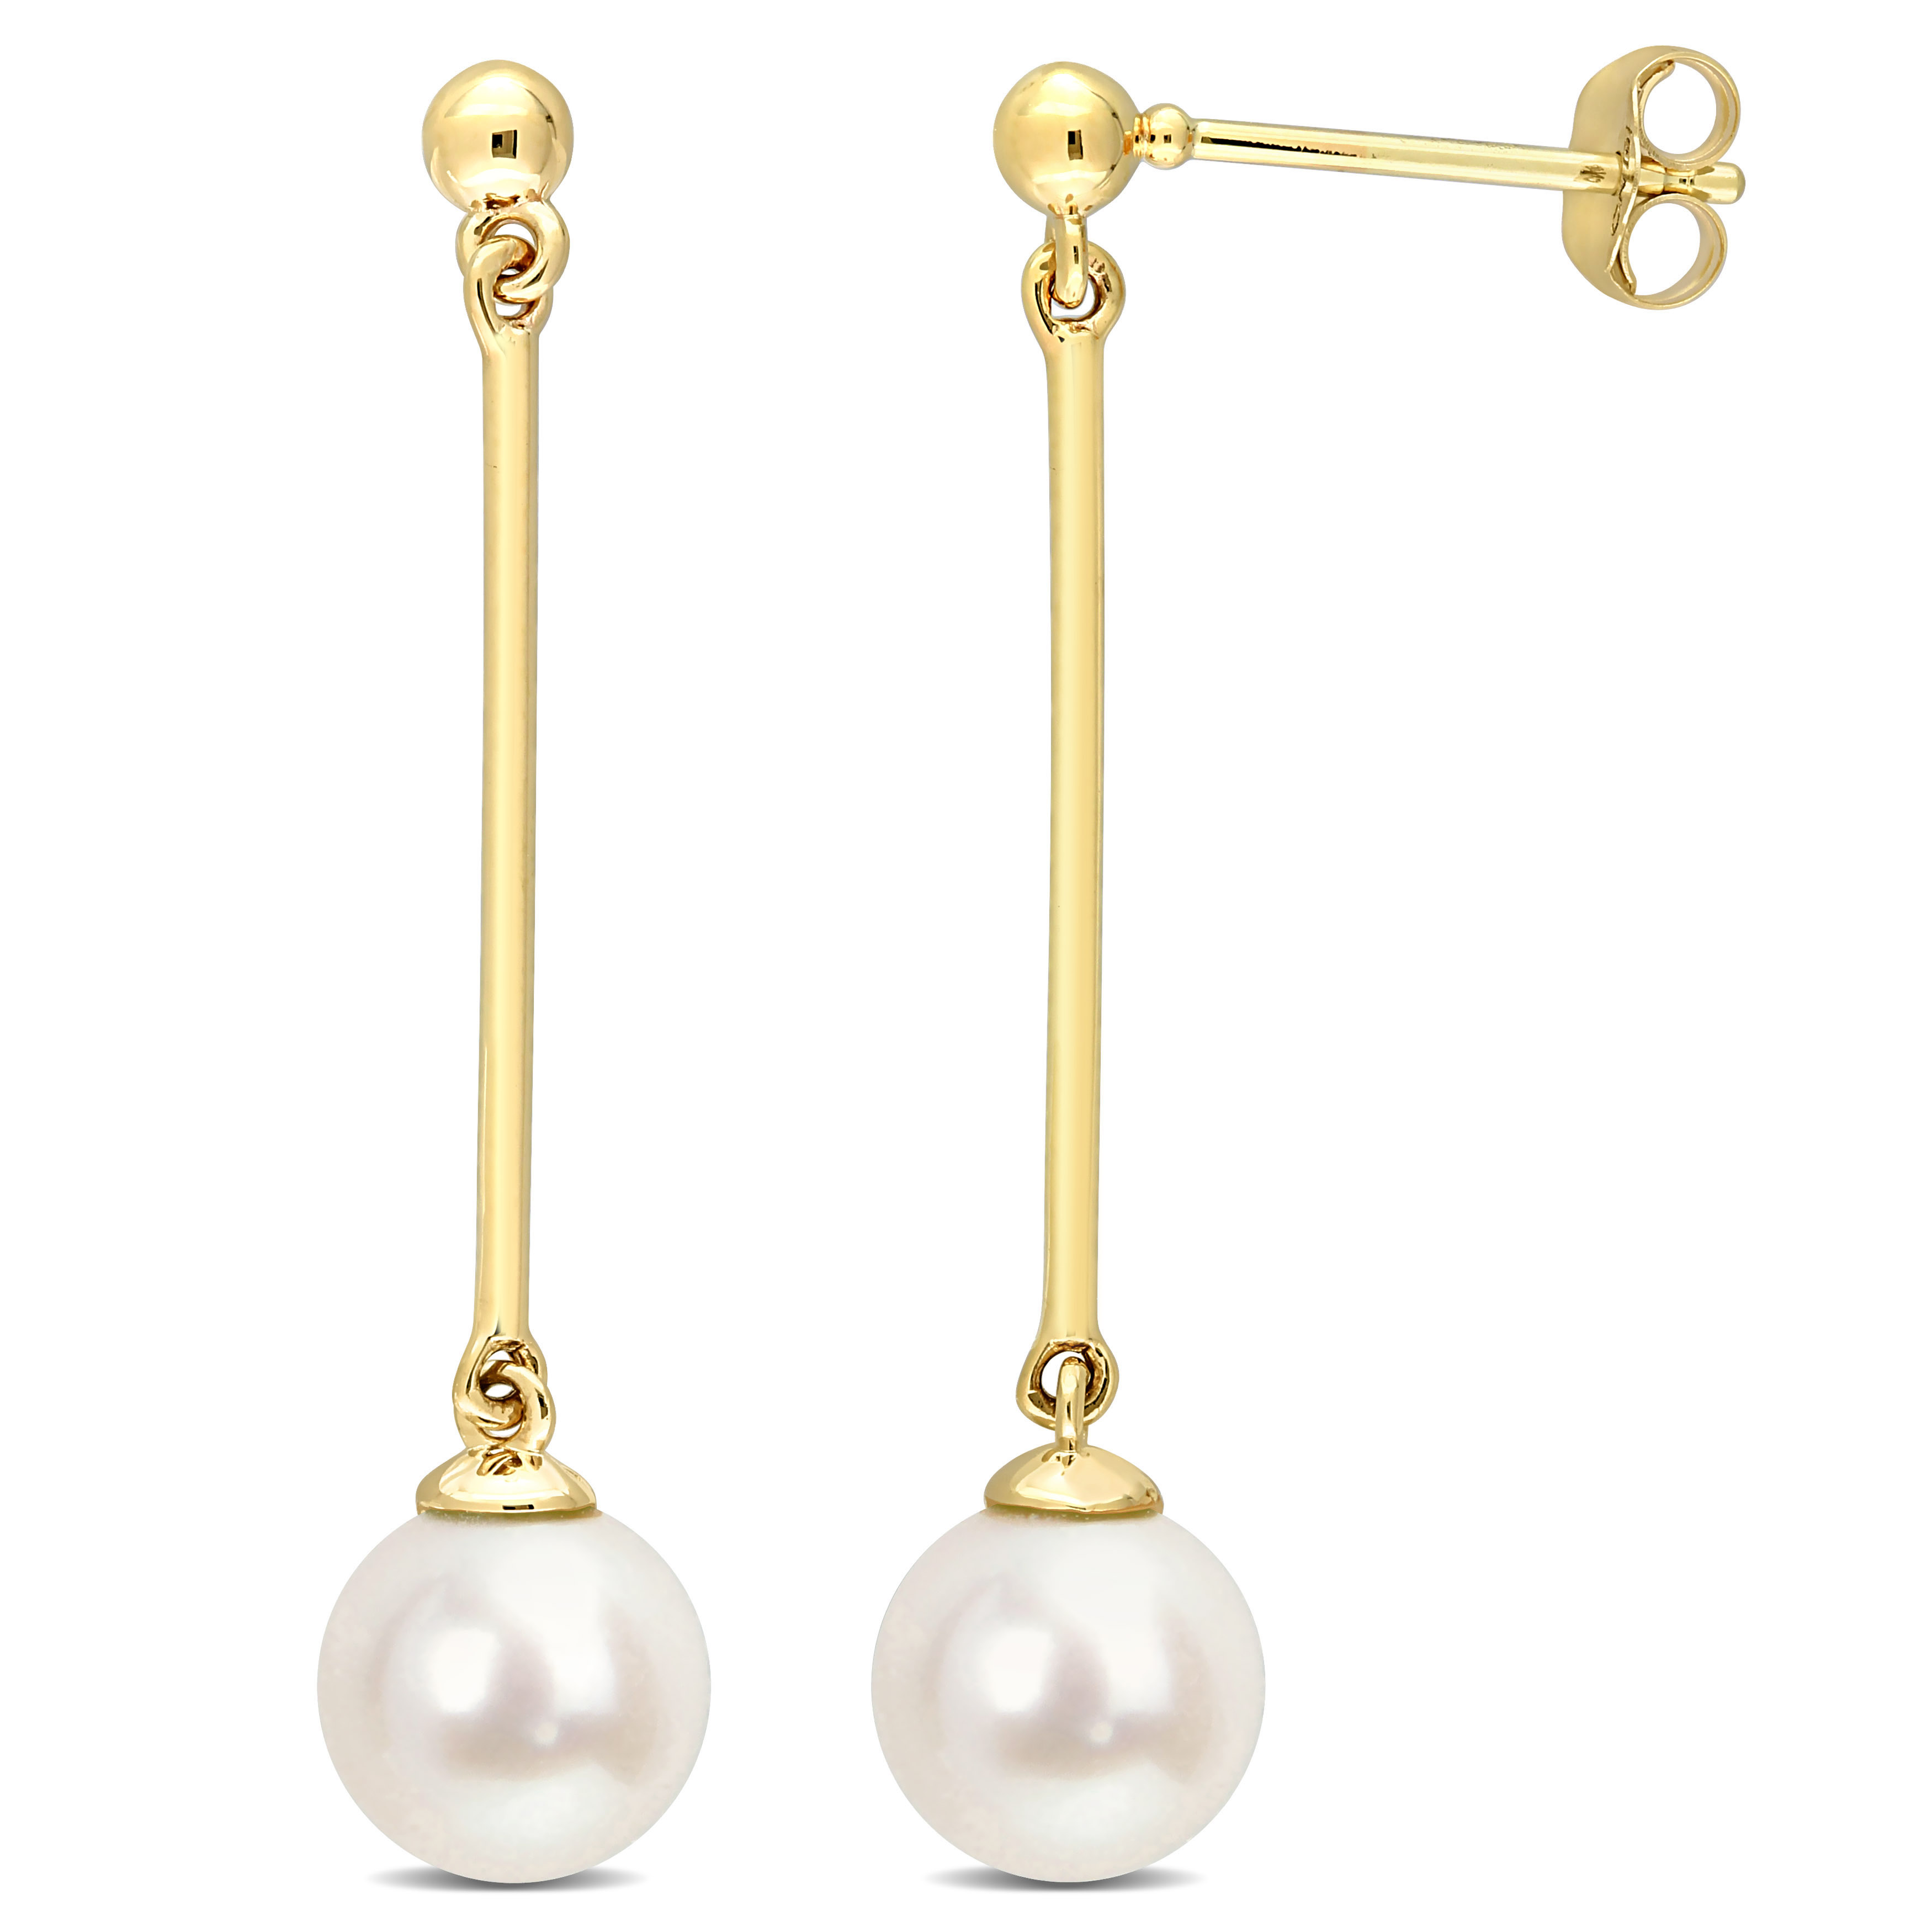 7-7.5 MM Cultured Freshwater Pearl and Chain Drop Earrings in 10k Yellow Gold